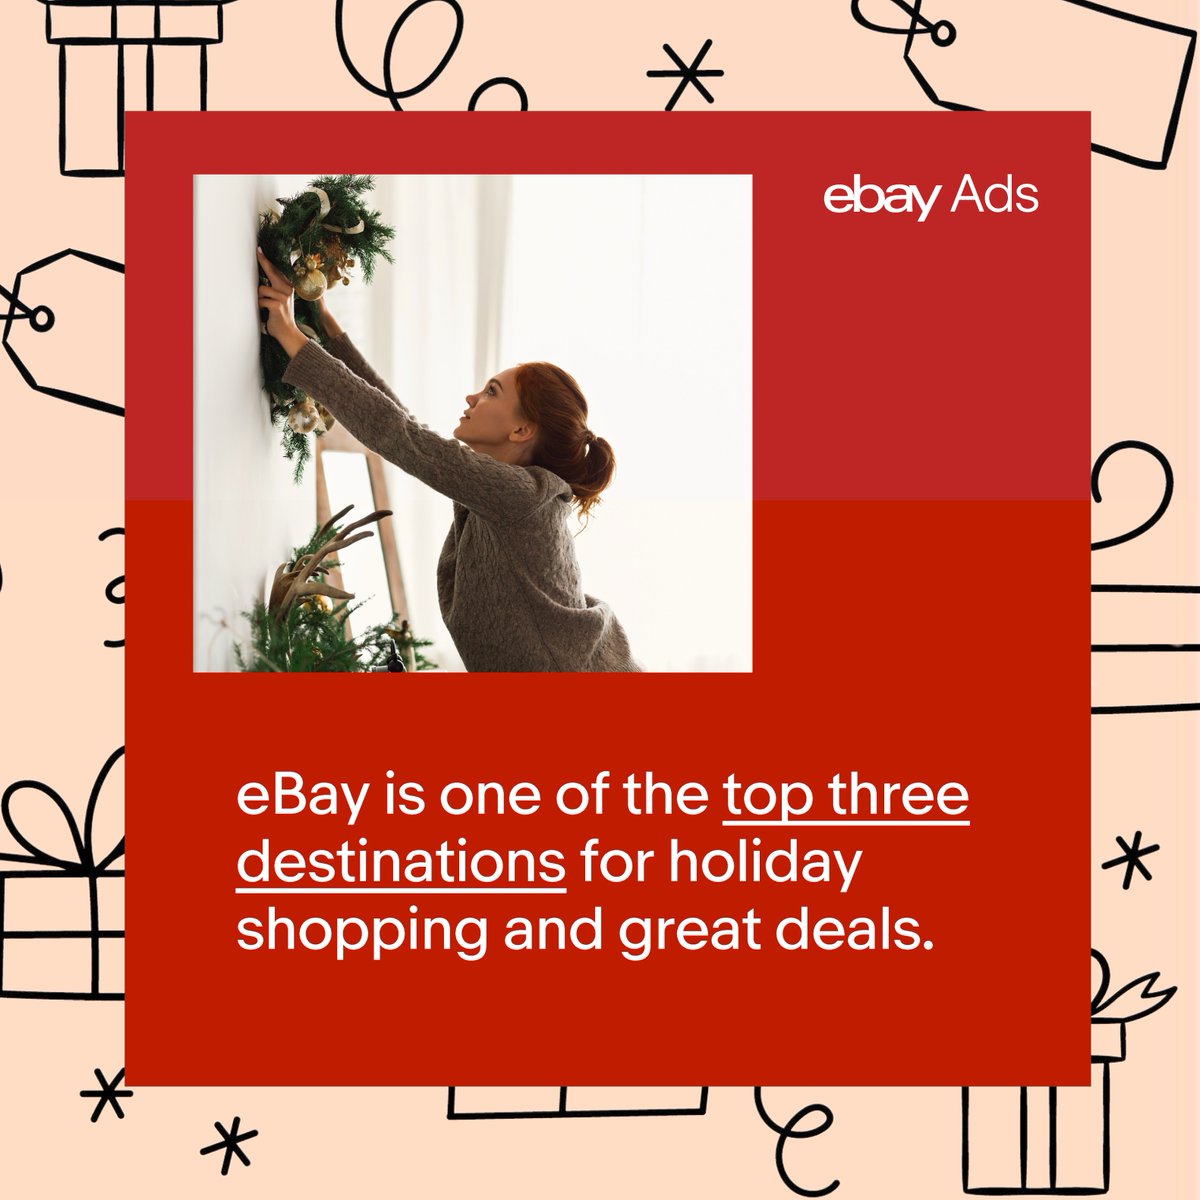 #BlackFriday is almost here. Make sure your listing stands out to eager buyers with our Promoted Listings portfolio. Learn more: ebayads.com/holiday-2023/